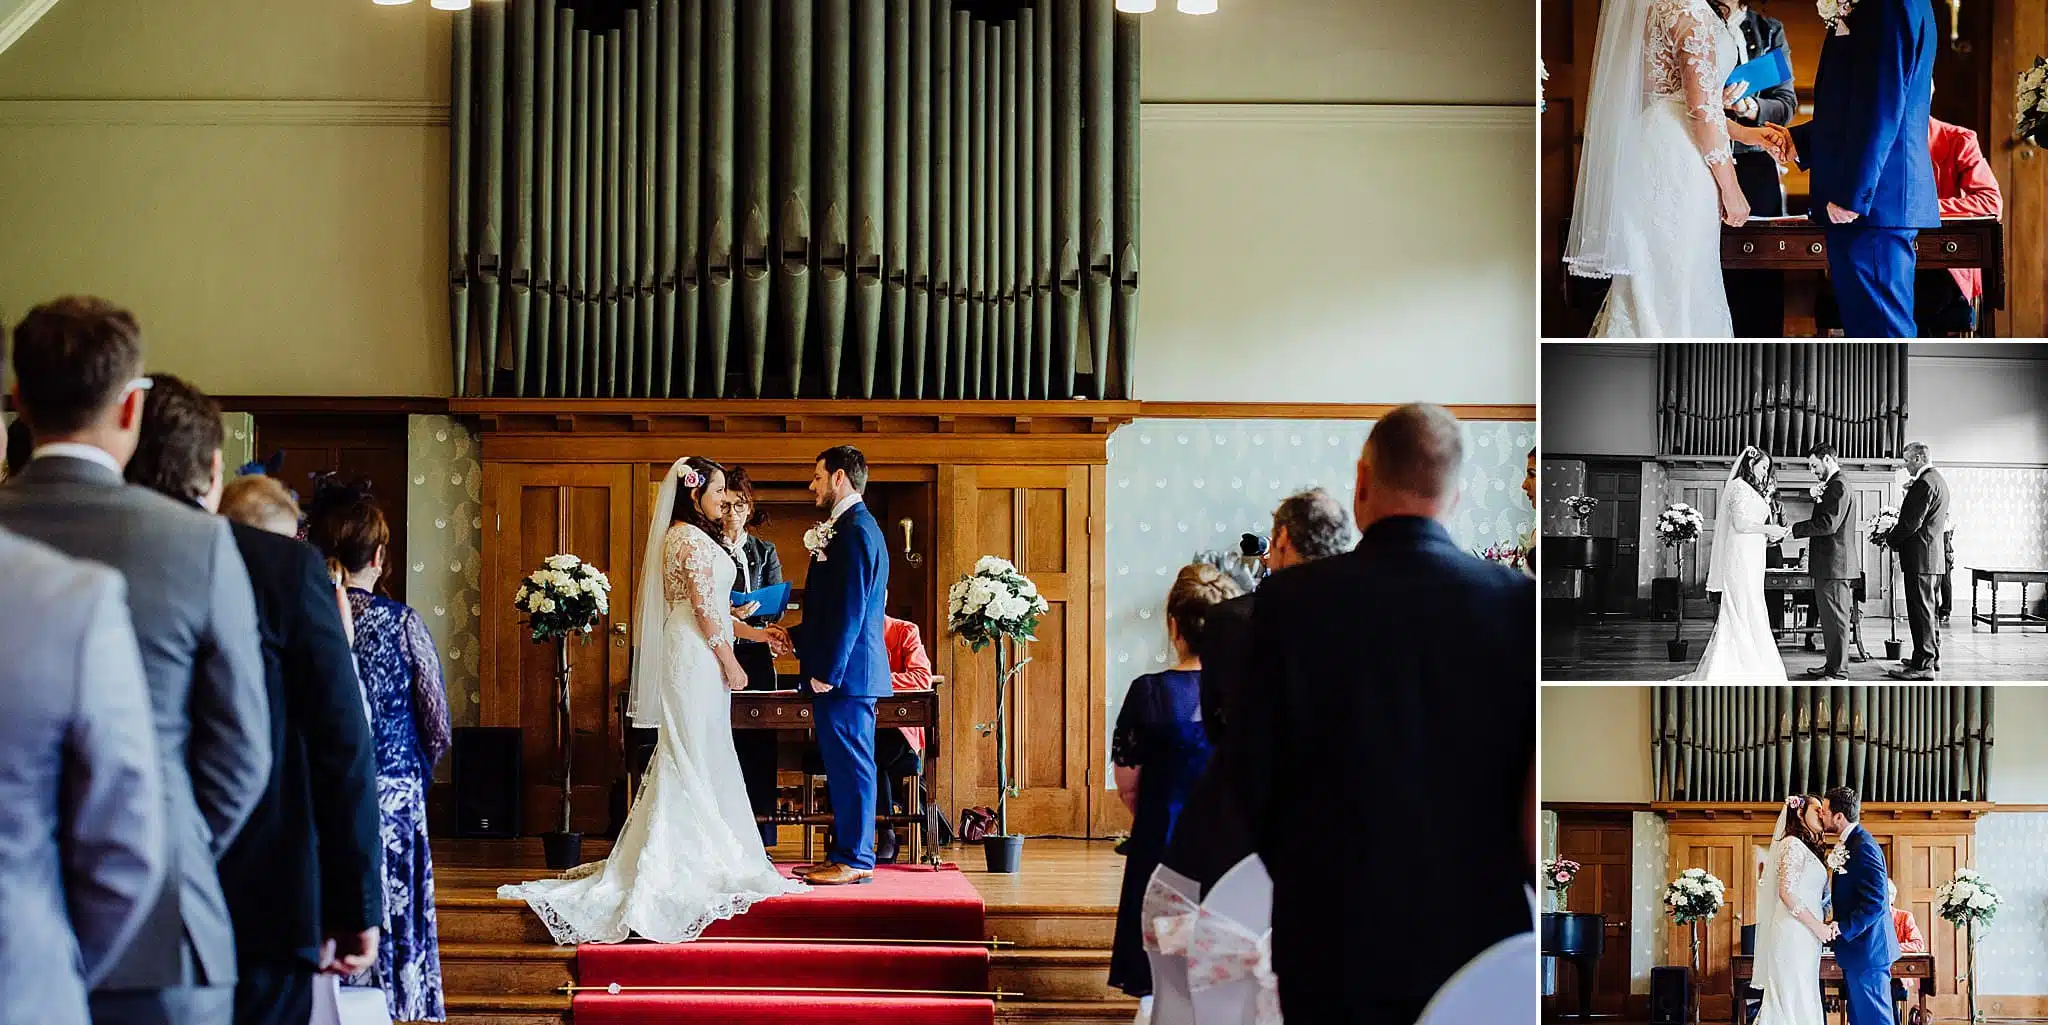 Bride and groom stood in front of the organ holding hands during their wedding ceremony at Gregnog Hall